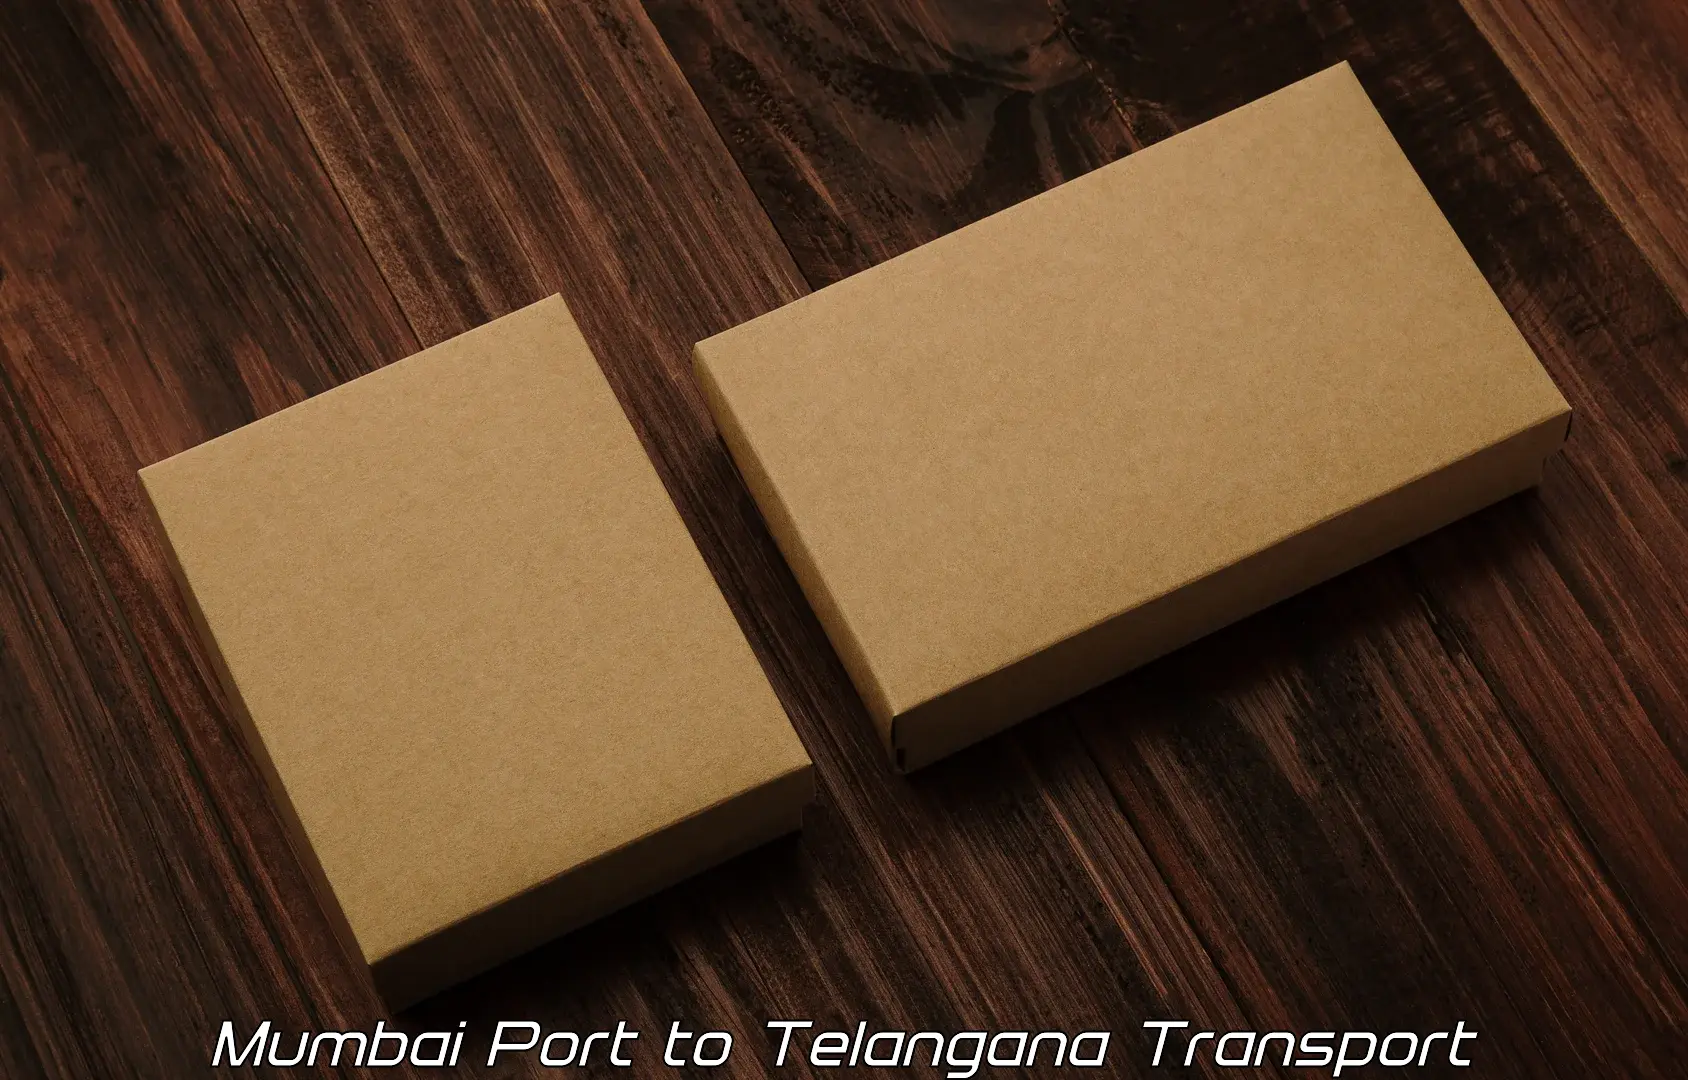 Transport bike from one state to another Mumbai Port to Ramagundam